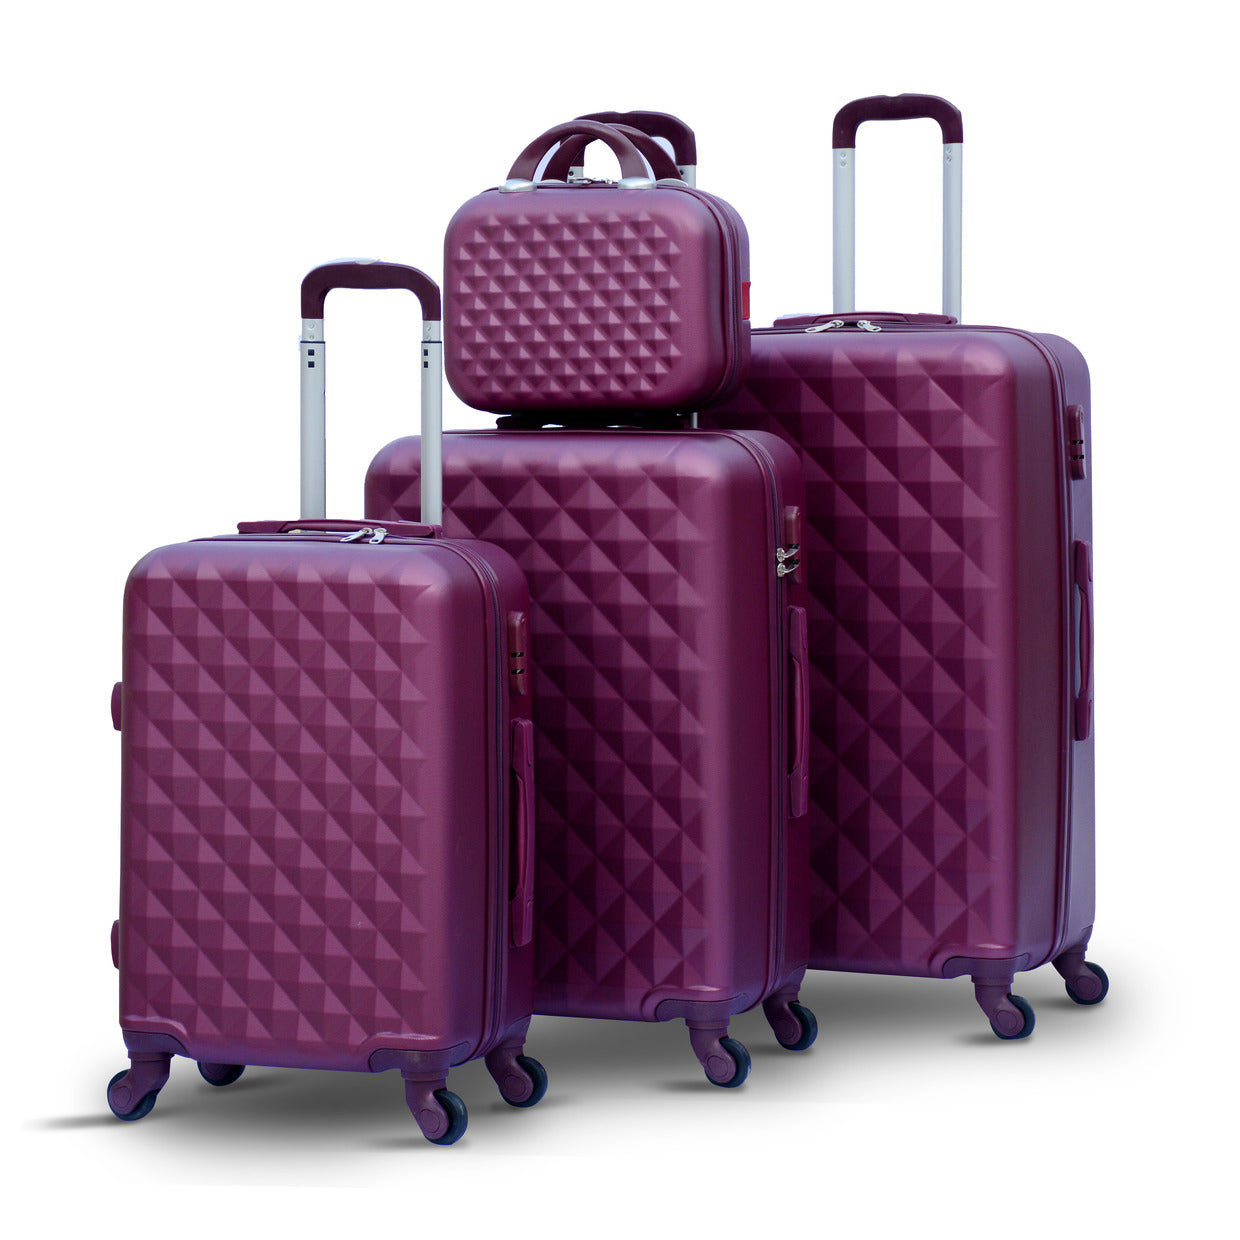 4 Piece Set 7” 20” 24” 28 Inches Diamond Cut ABS Lightweight Luggage Bag With Spinner Wheel Zaappy